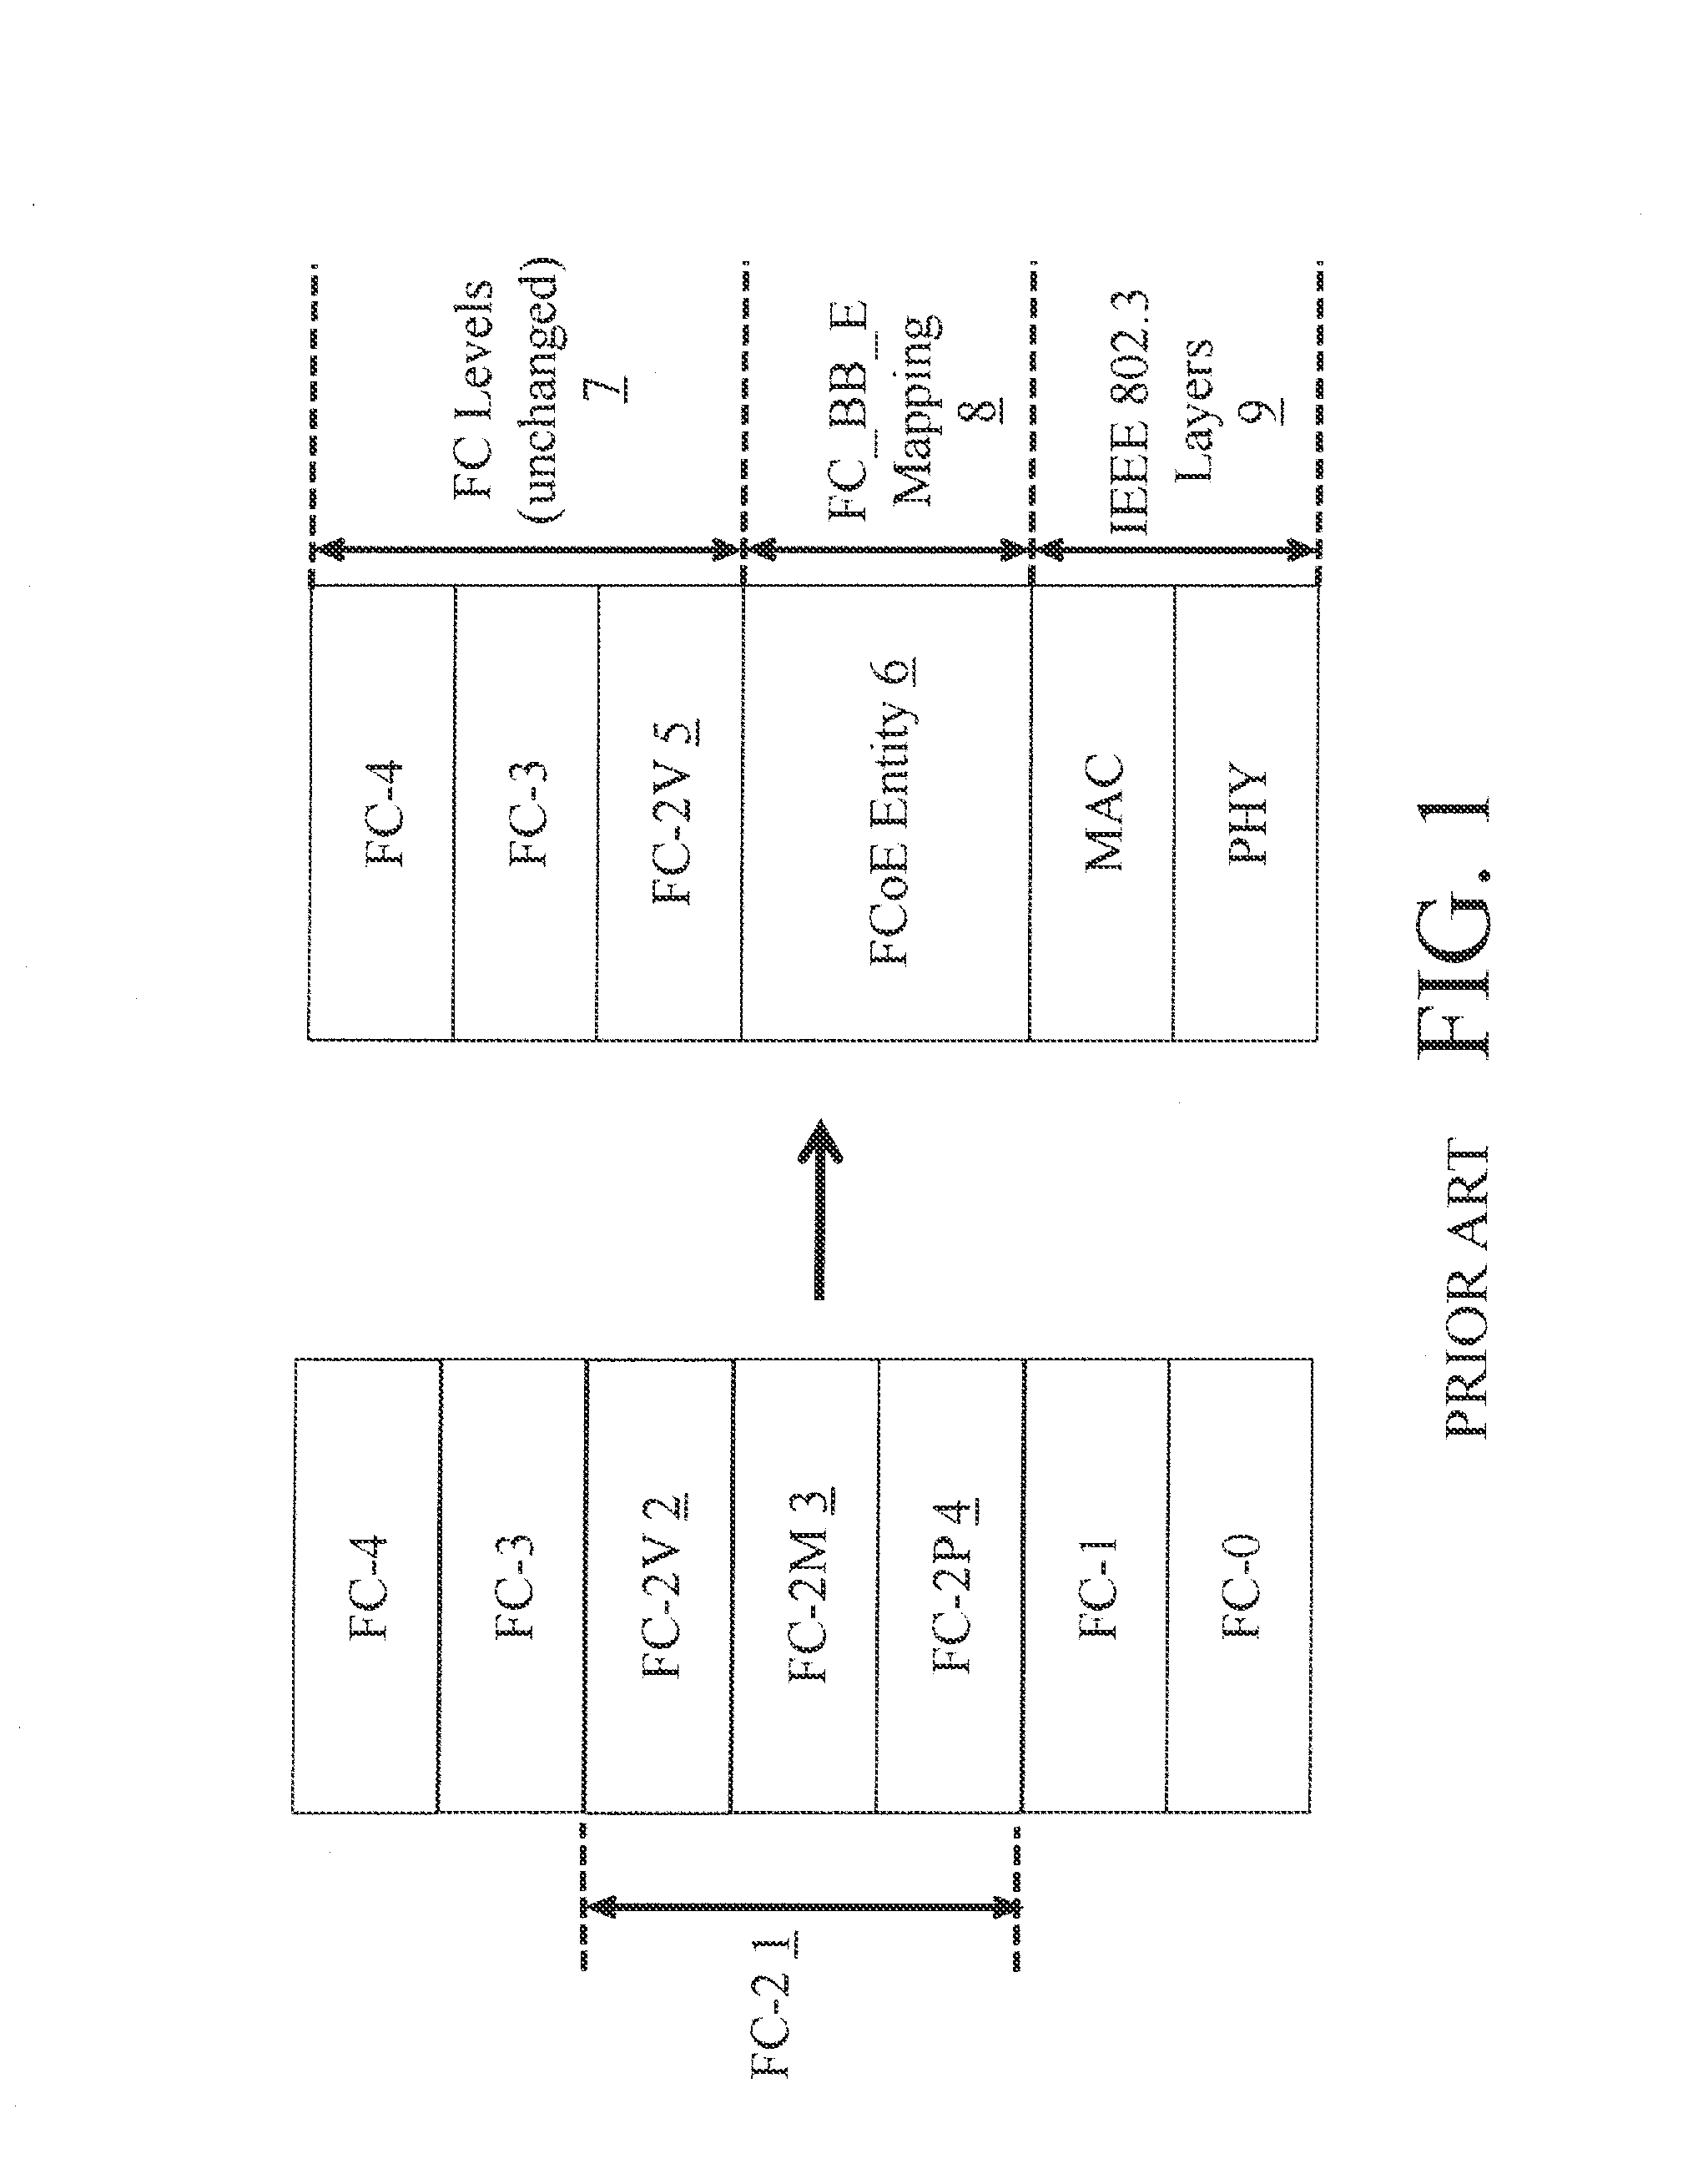 Methods, systems and apparatus for the interconnection of fibre channel over ethernet devices using a fibre channel over ethernet interconnection apparatus controller